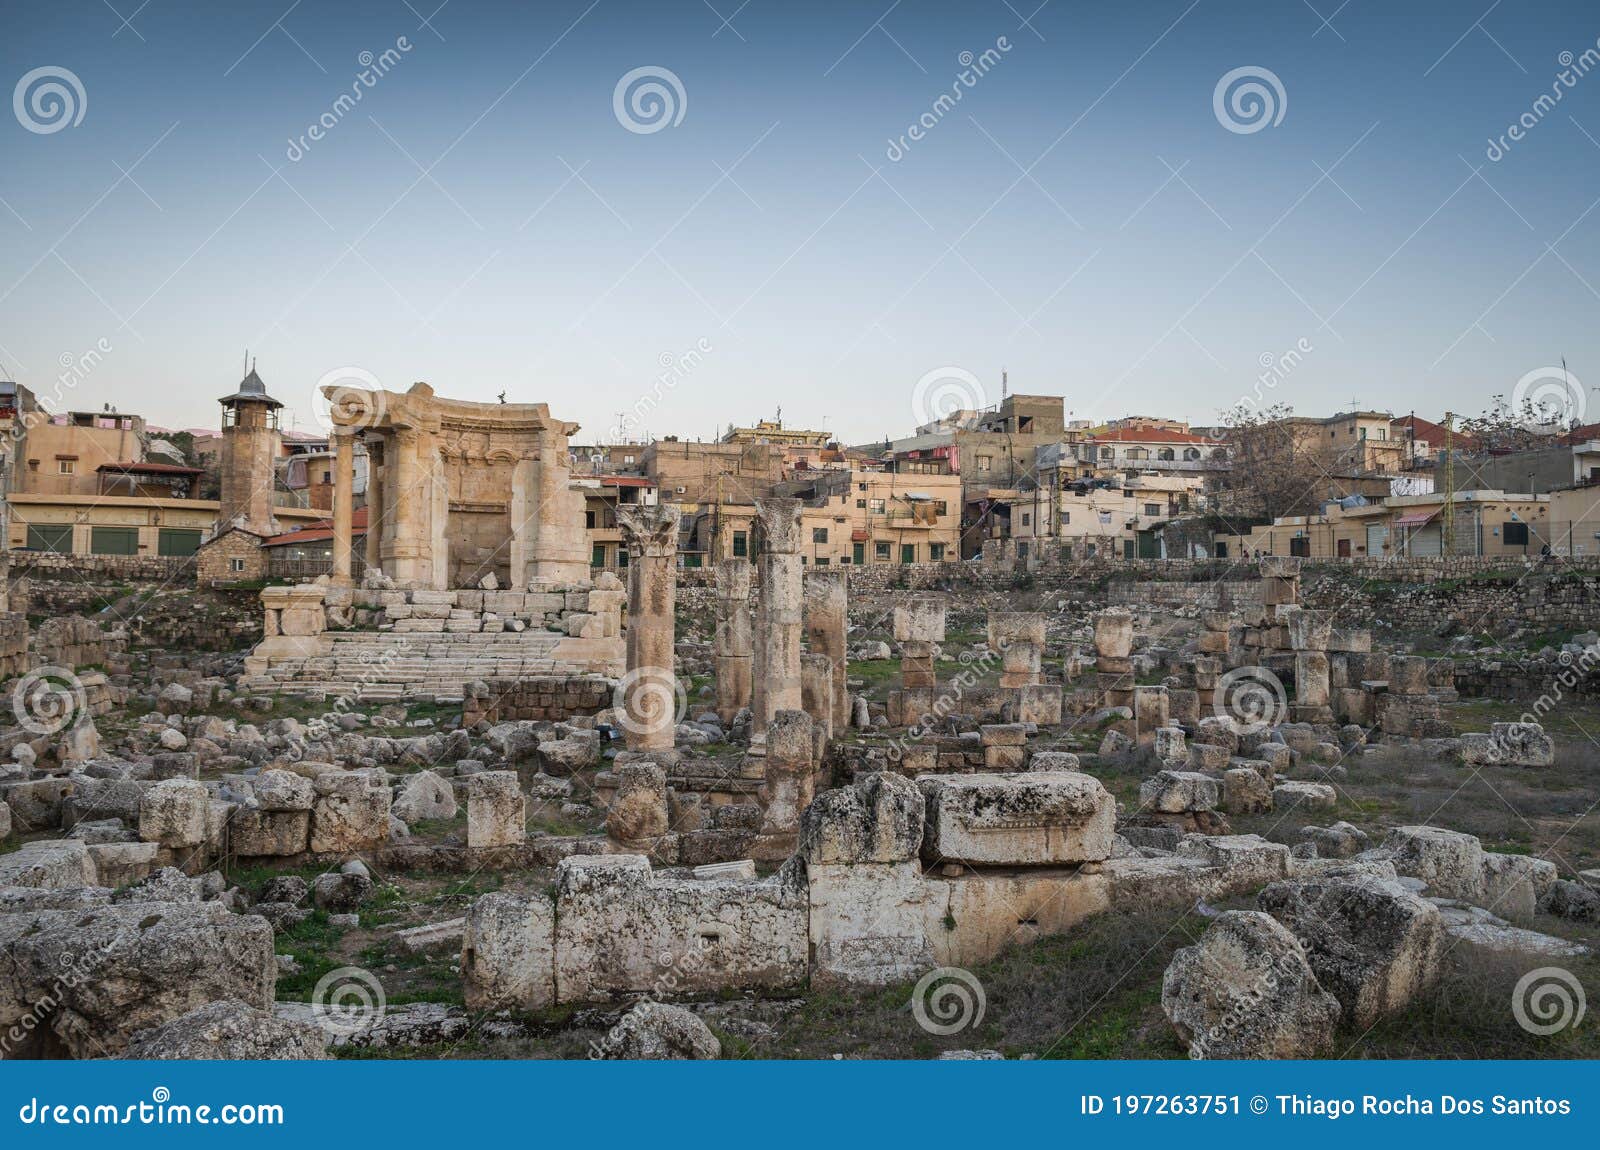 temple of baco. ruins of baalbek. ancient city of phenicia located in the beca valley in lebanon. acropolis with roman remains